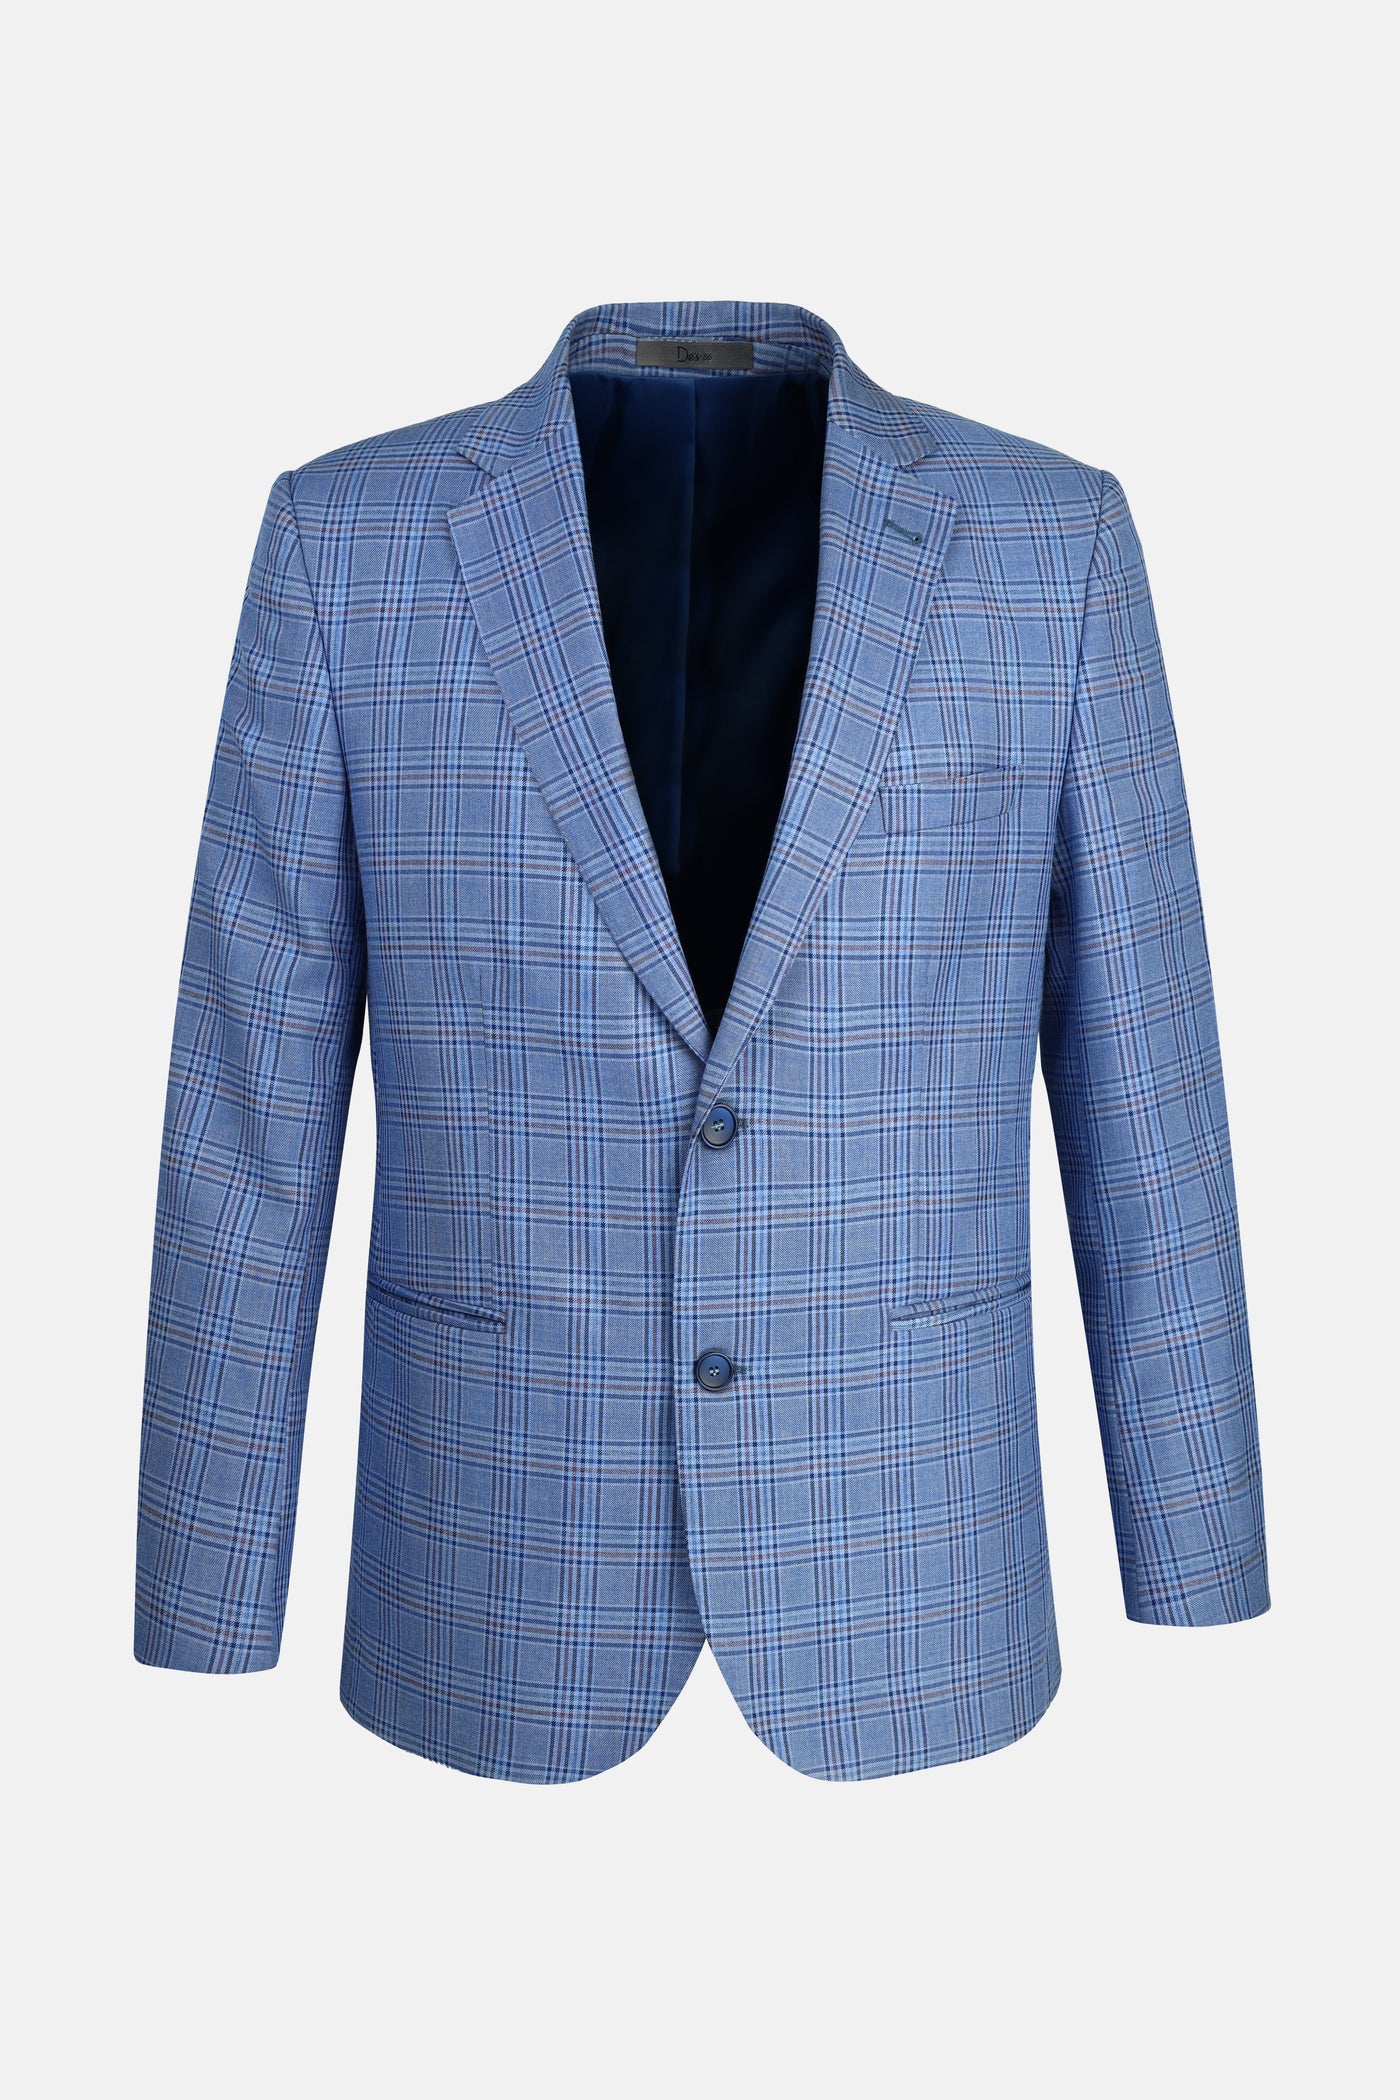 Checked Wool Knitted Blue & Navy Blazer